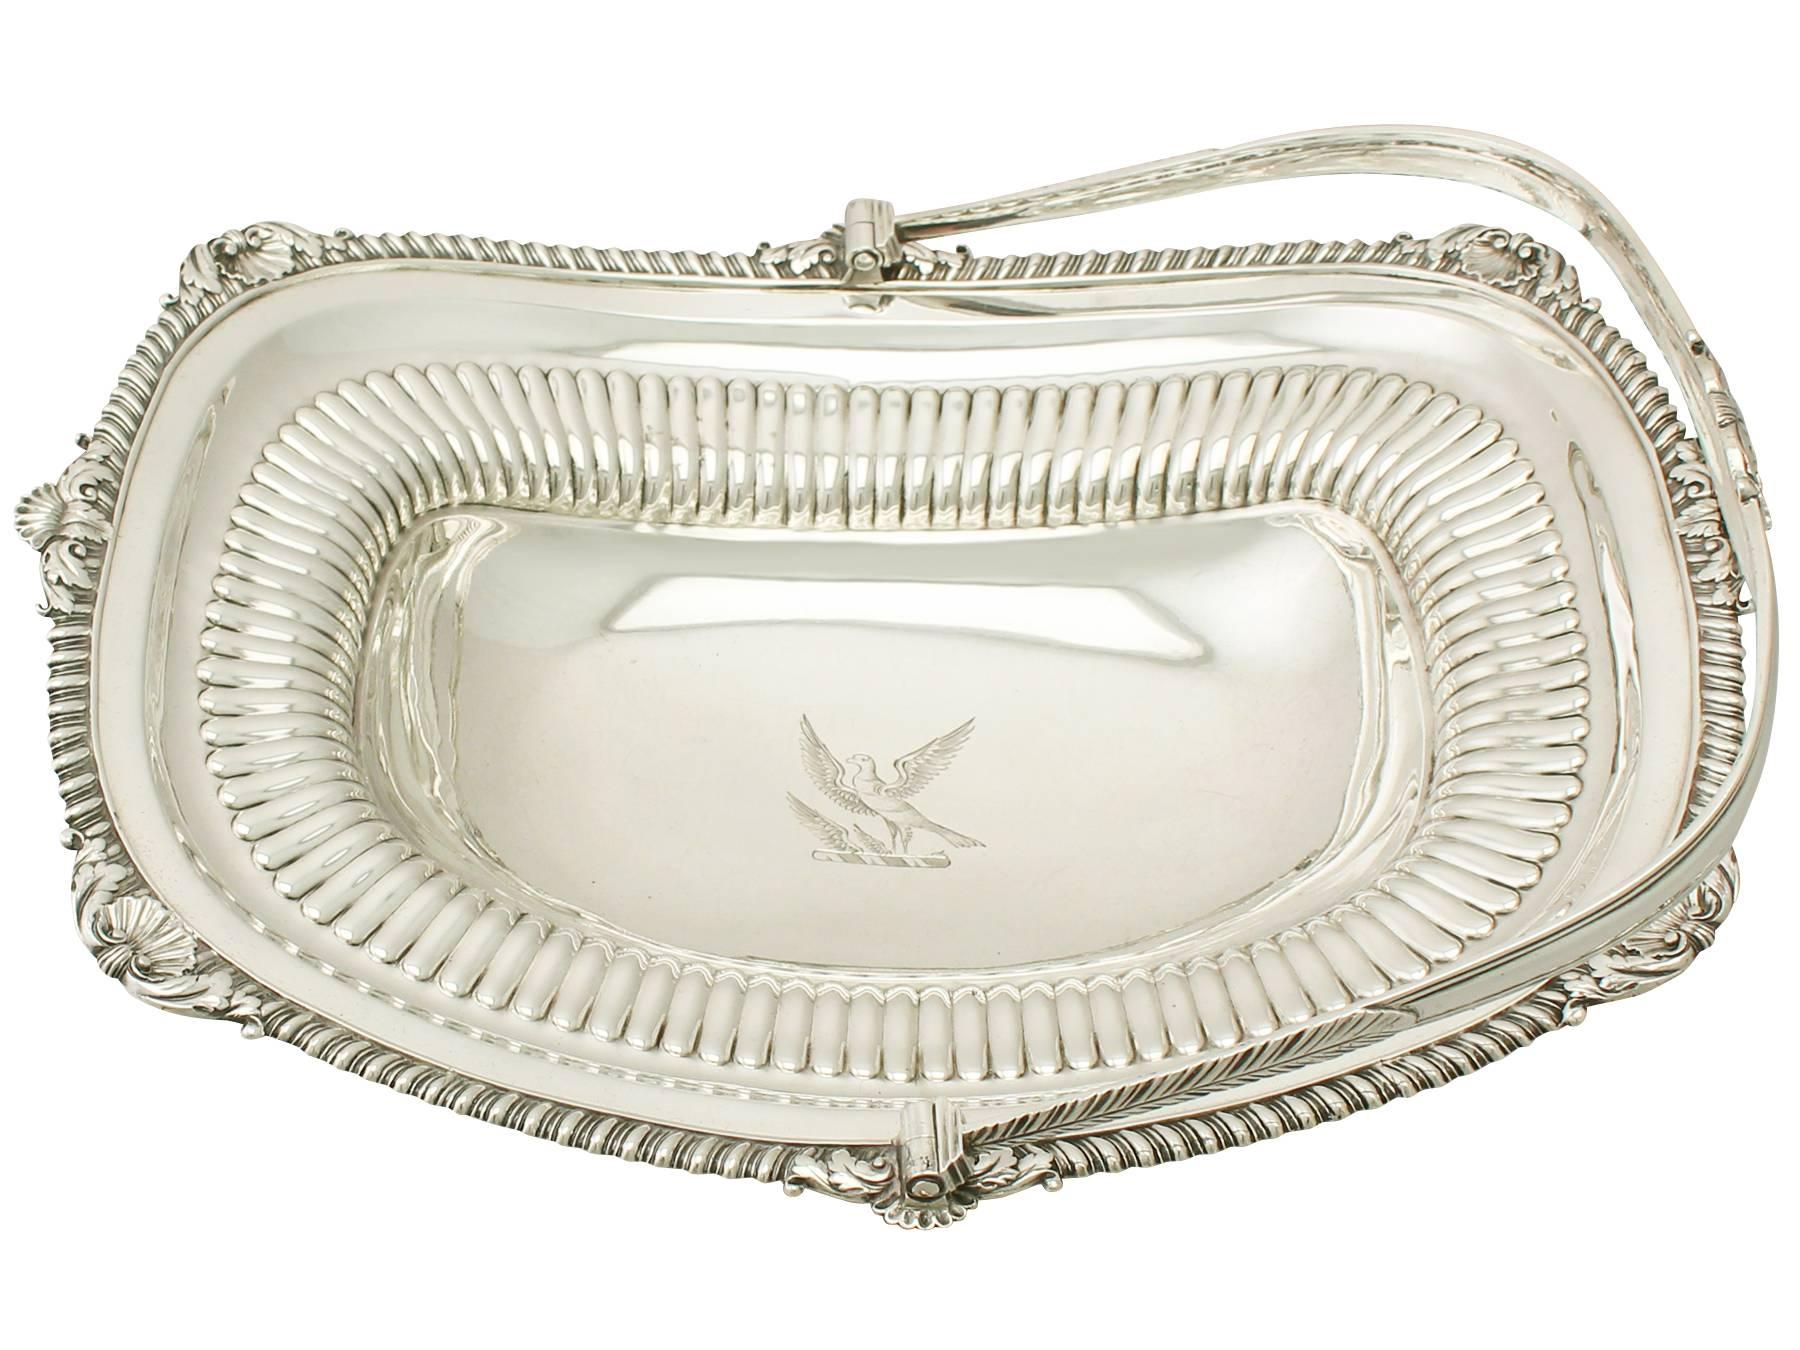 English Antique George III Sterling Silver Cake Basket by Paul Storr